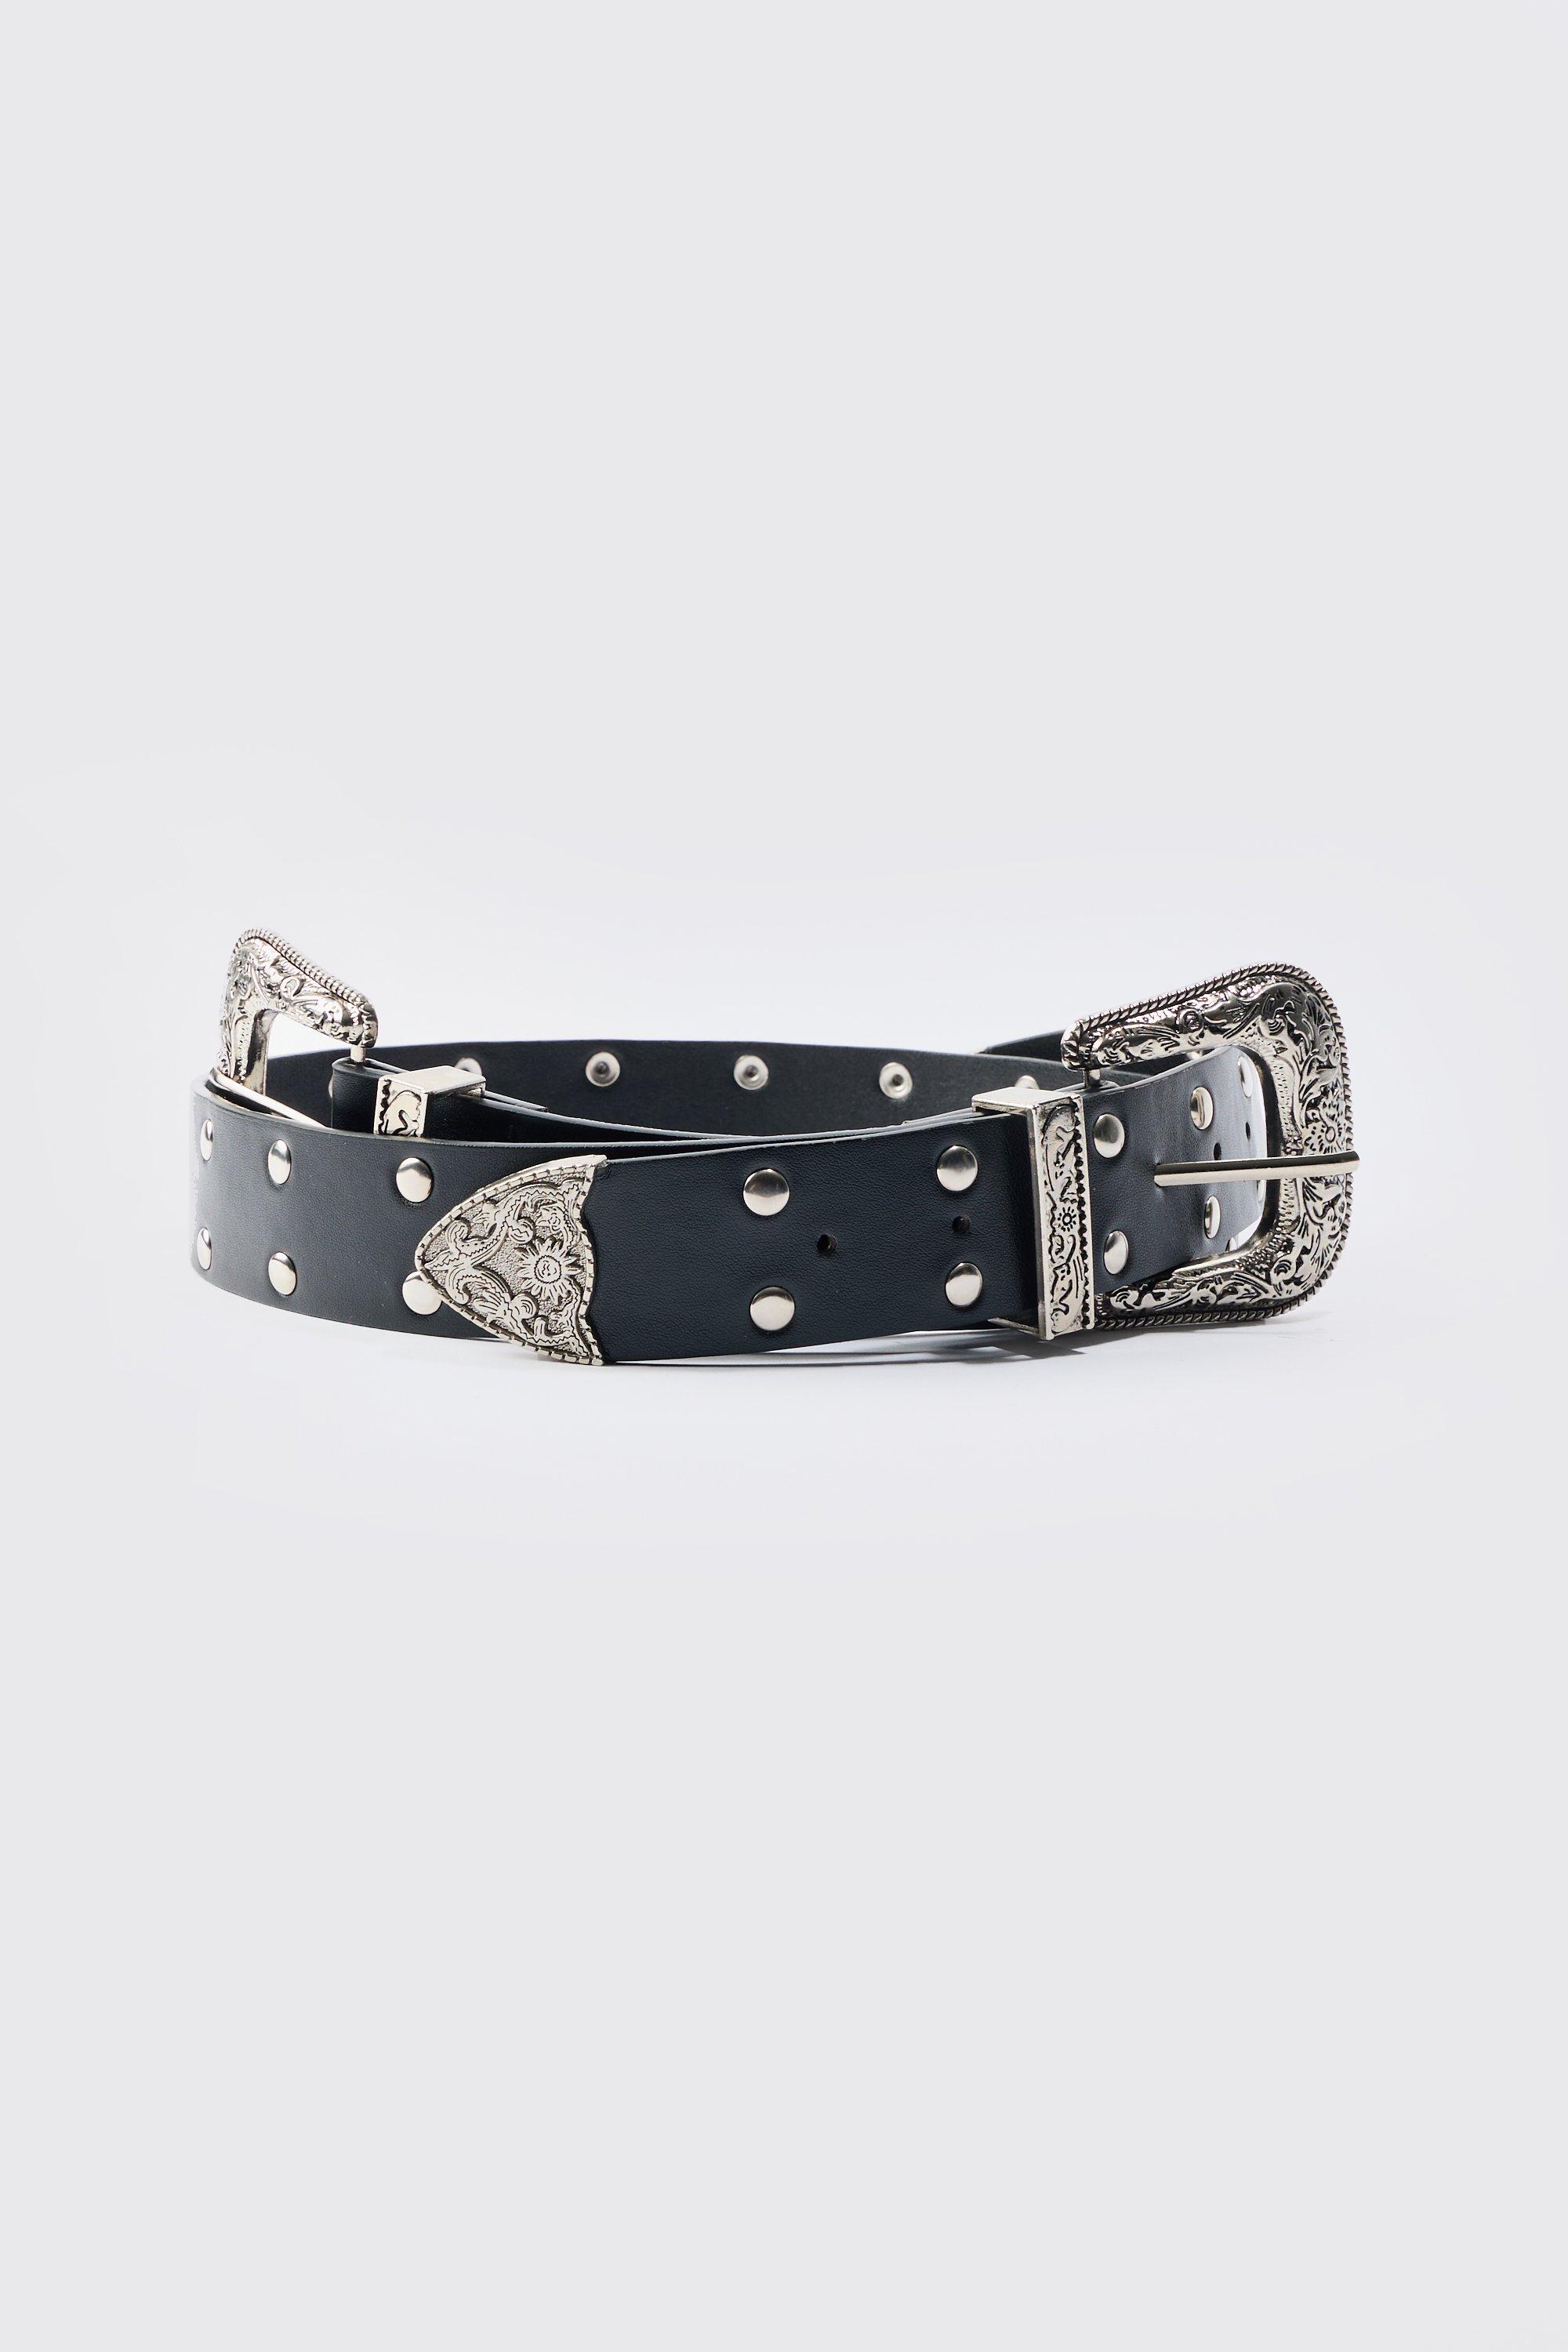 Image of Double Buckle Studded Belt In Black, Nero